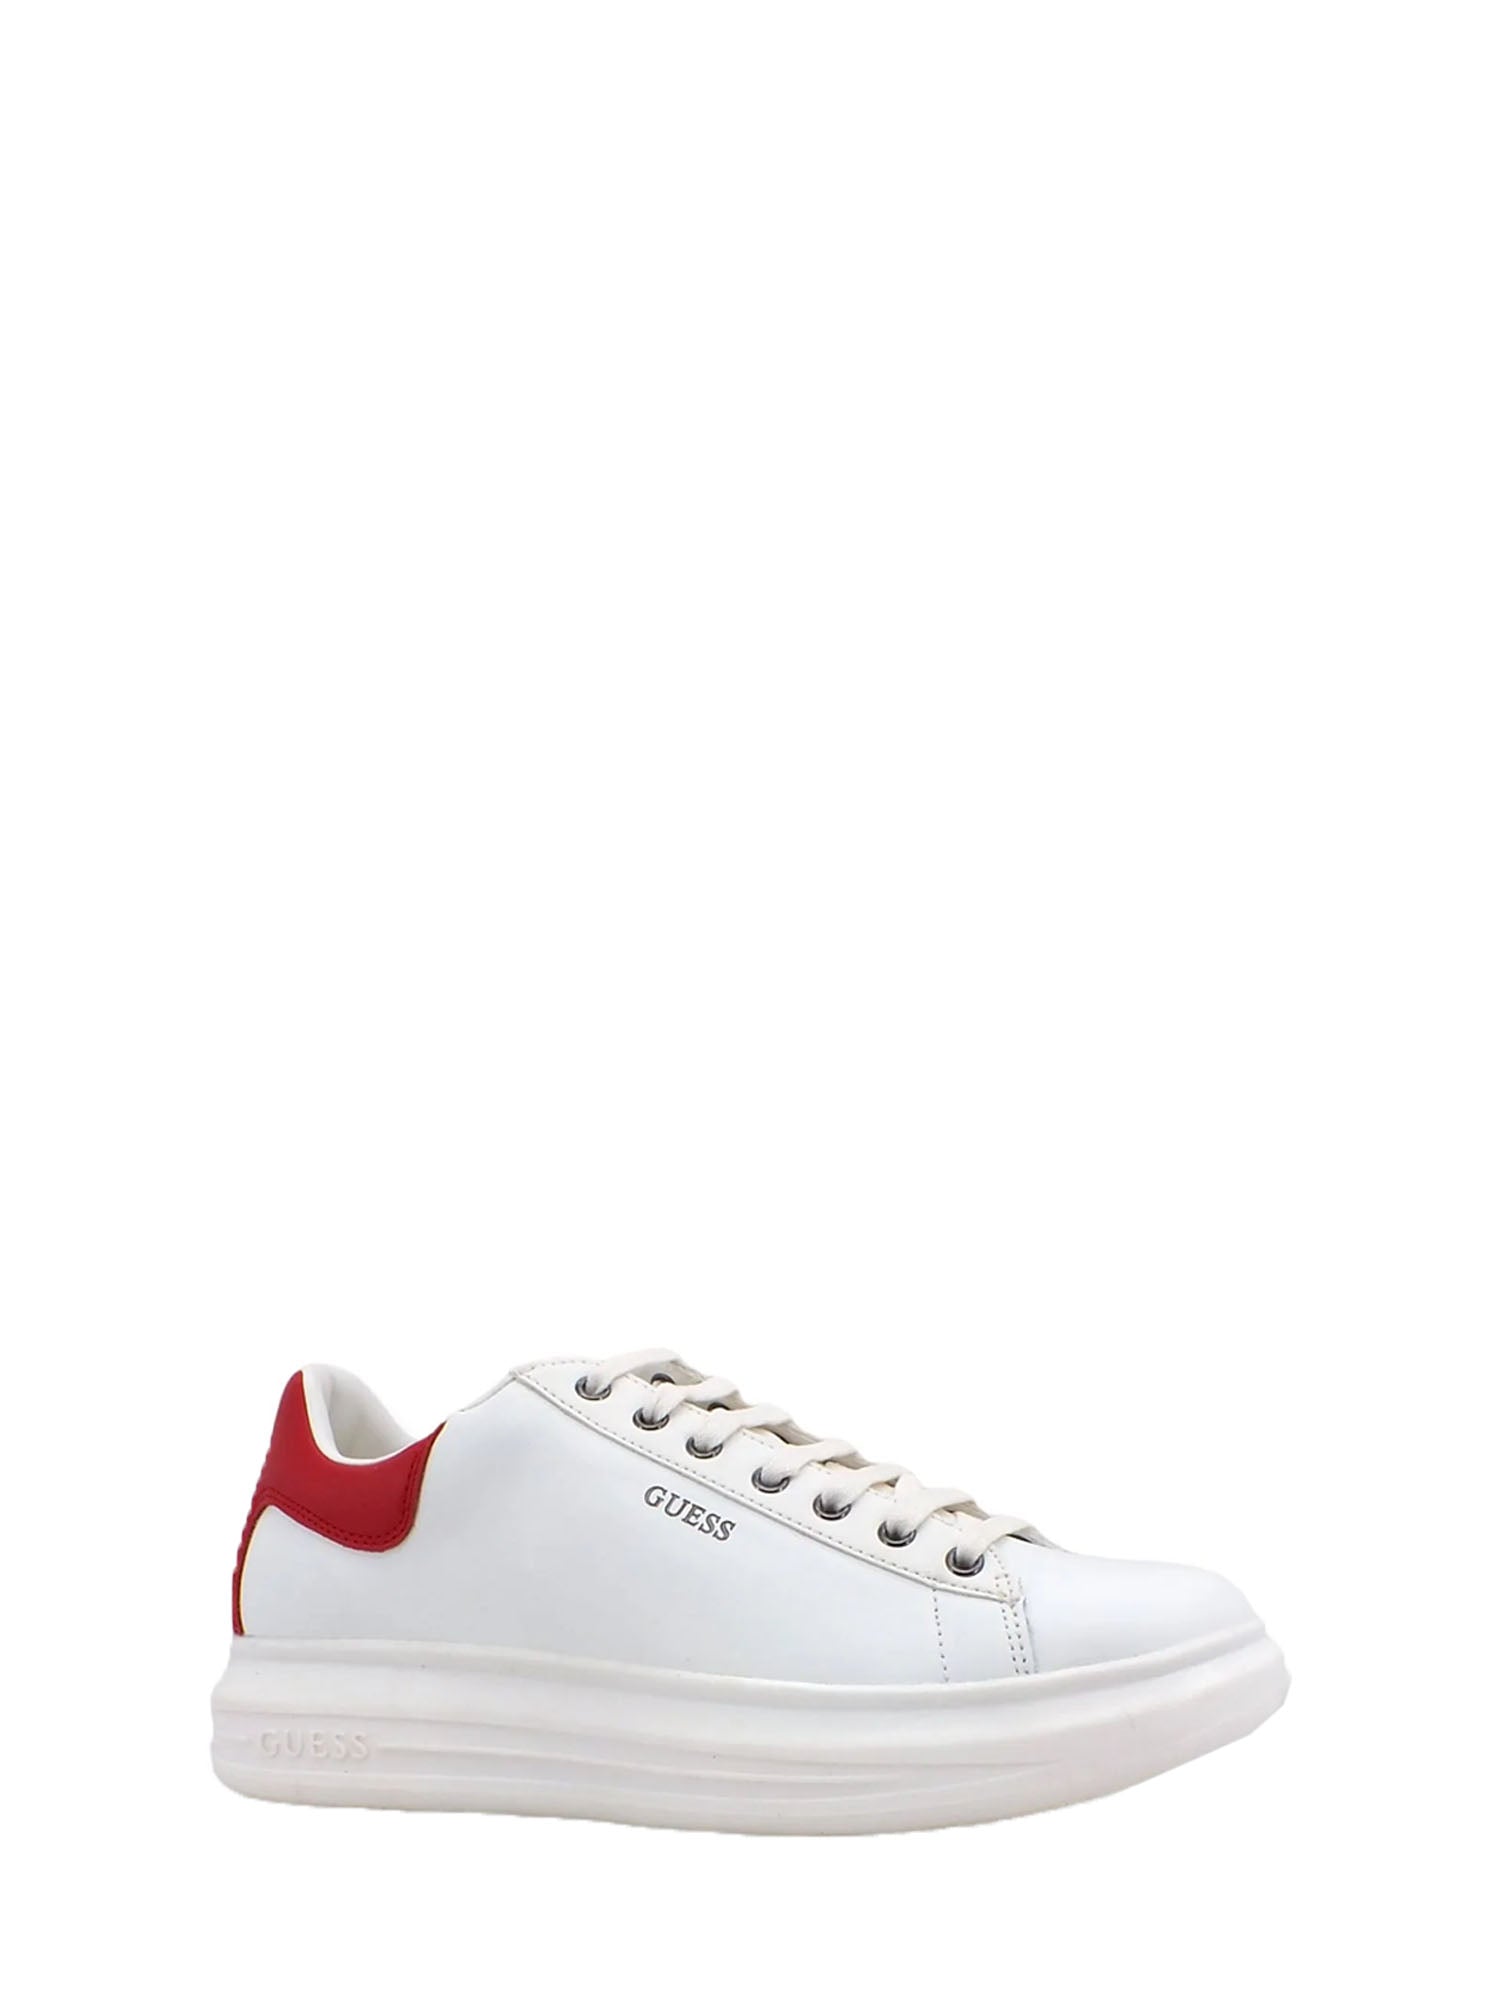 GUESS JEANS SNEAKERS SALERNO BIANCO - ROSSO